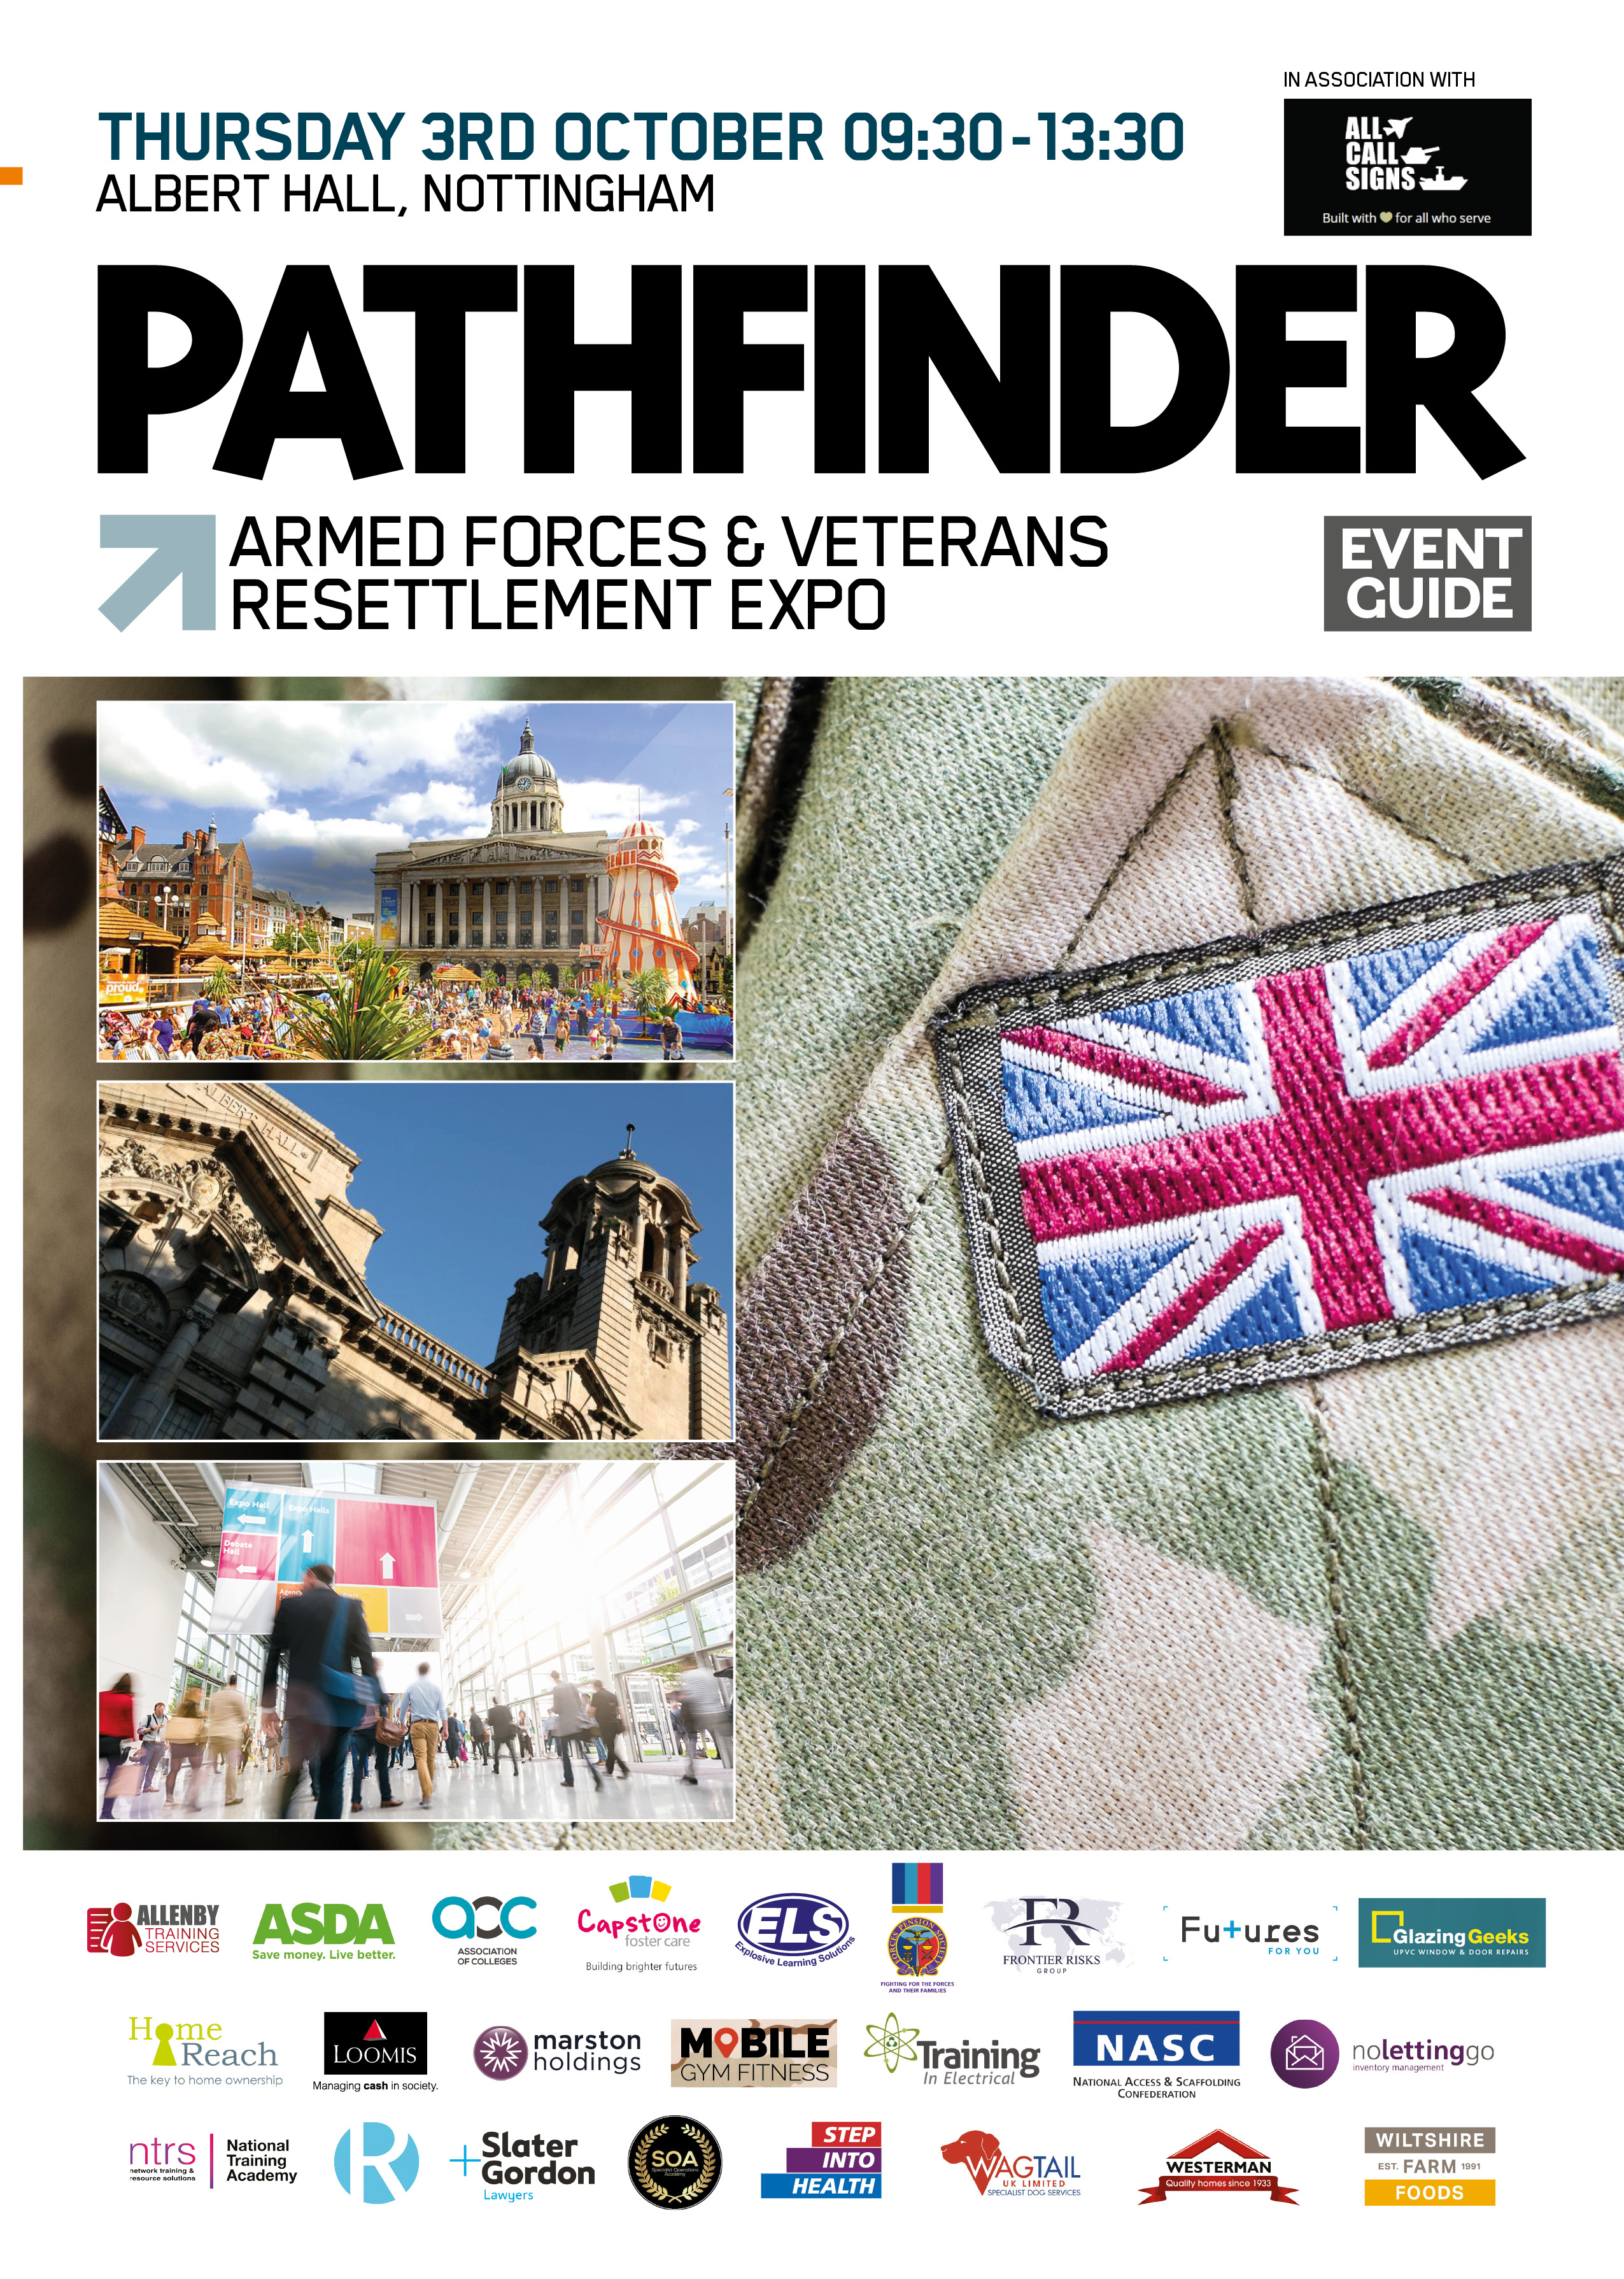 Read The Pathfinder International Armed Forces & Veterans Expo Nottingham Event Guide Here